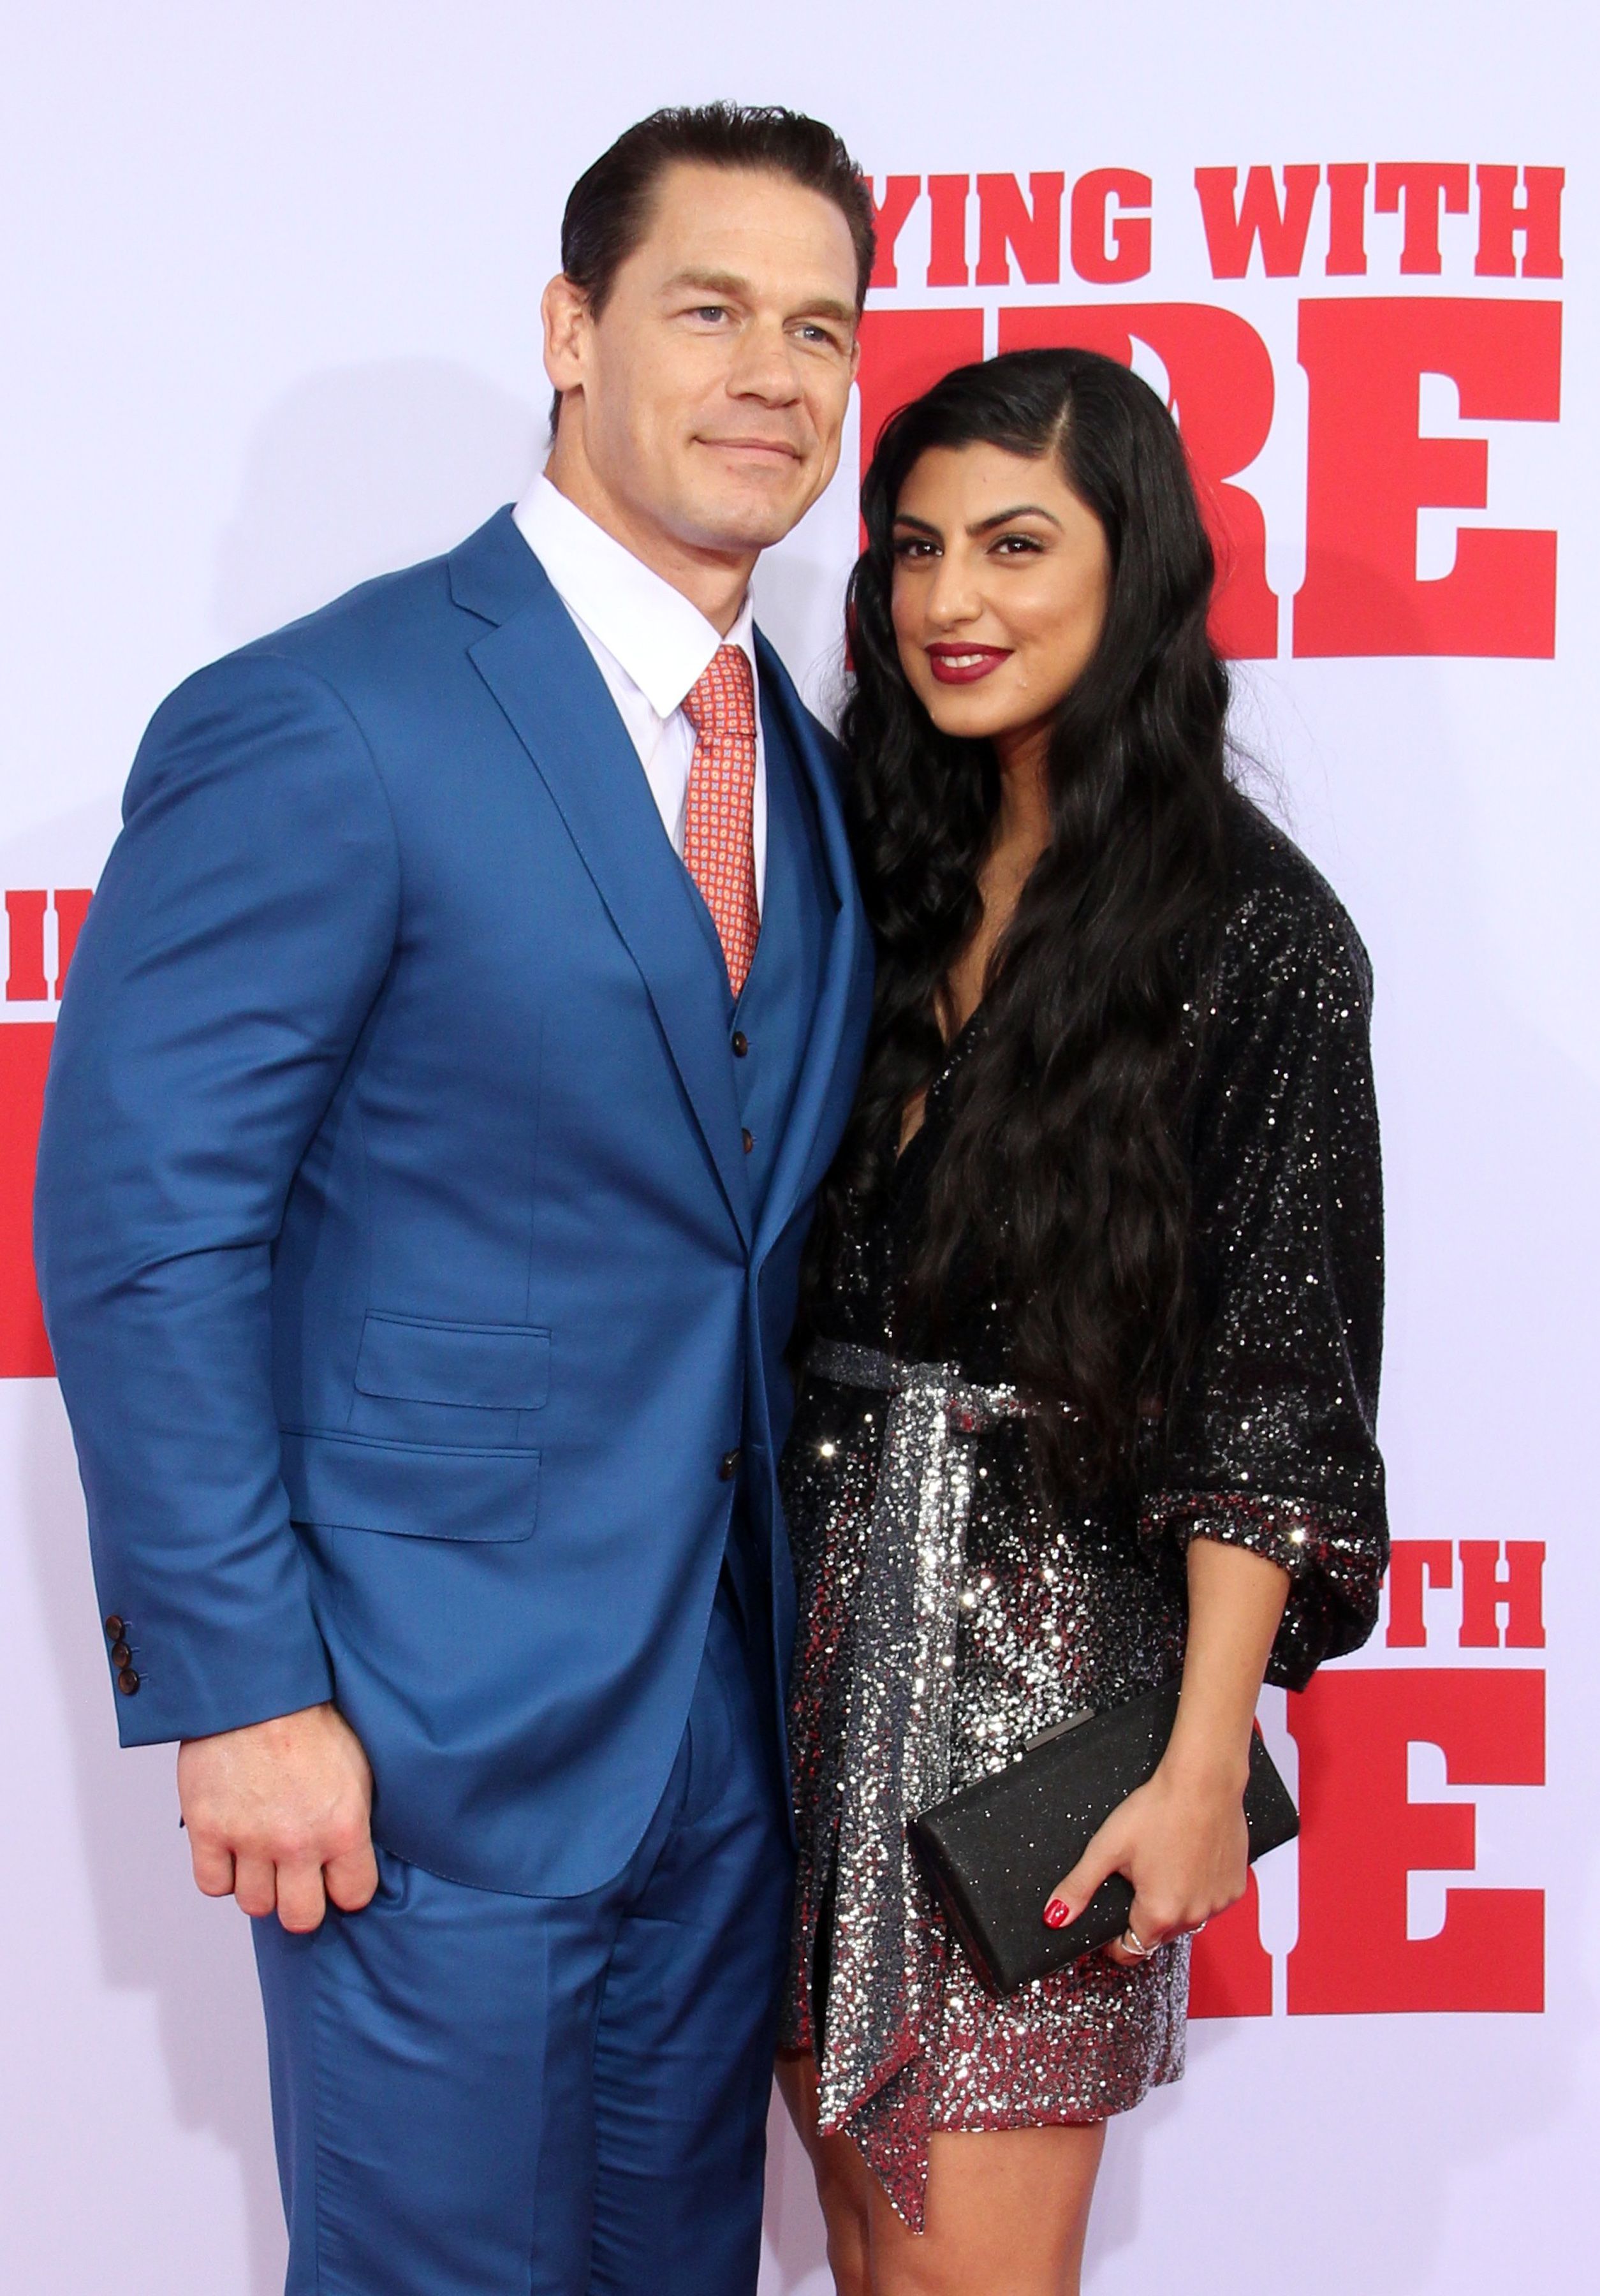 John Cena's Quotes About Love and Shay Shariatzadeh